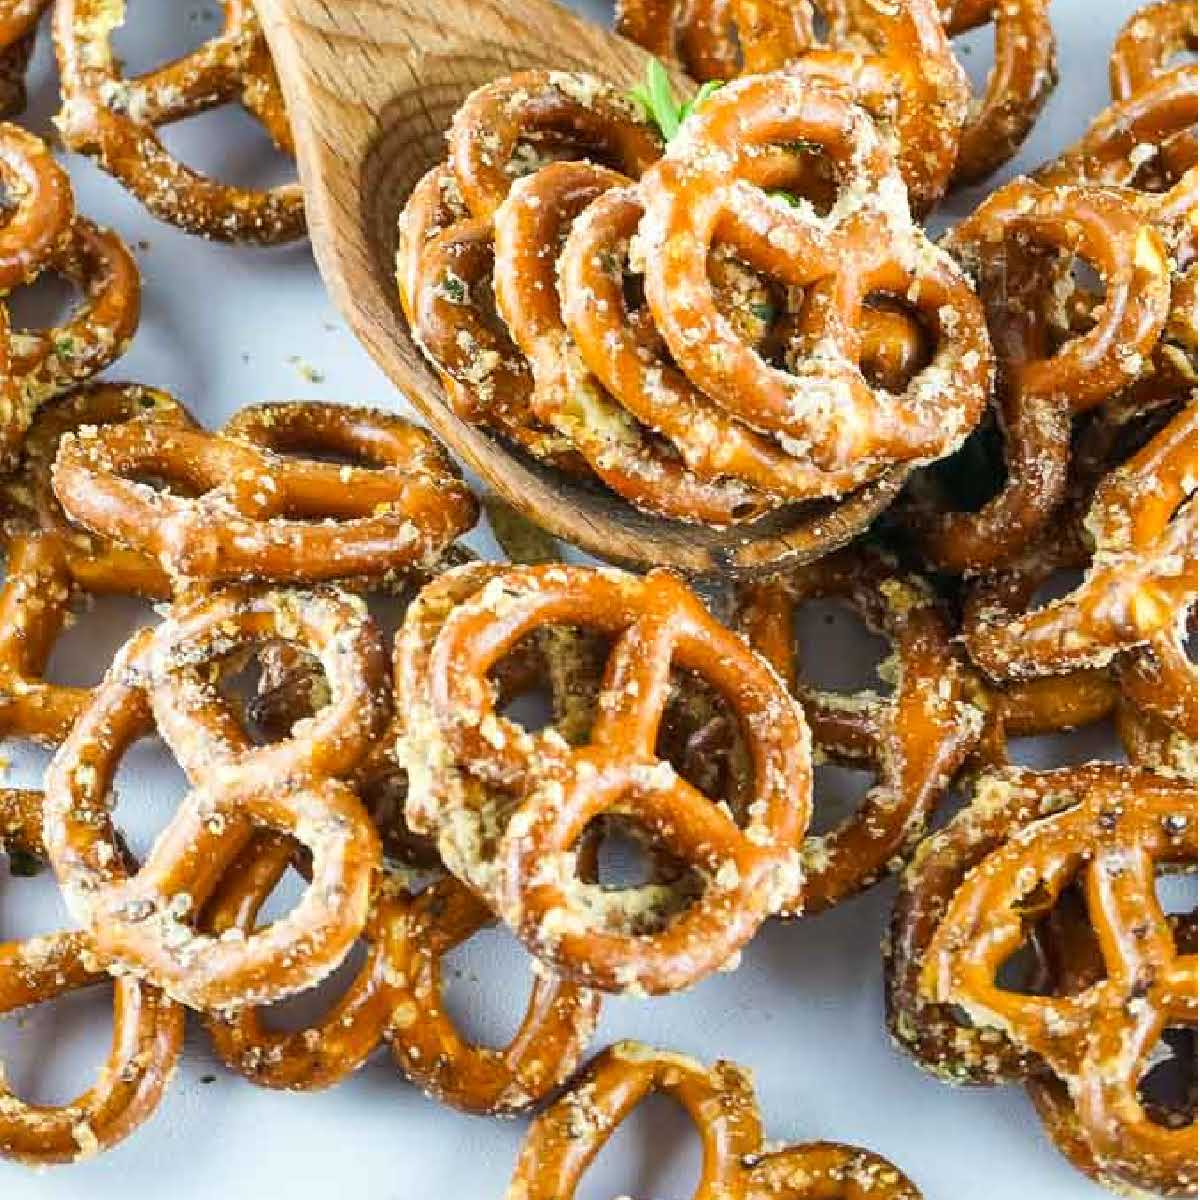 top close up of bake ranched pretzels with wooden spoonful